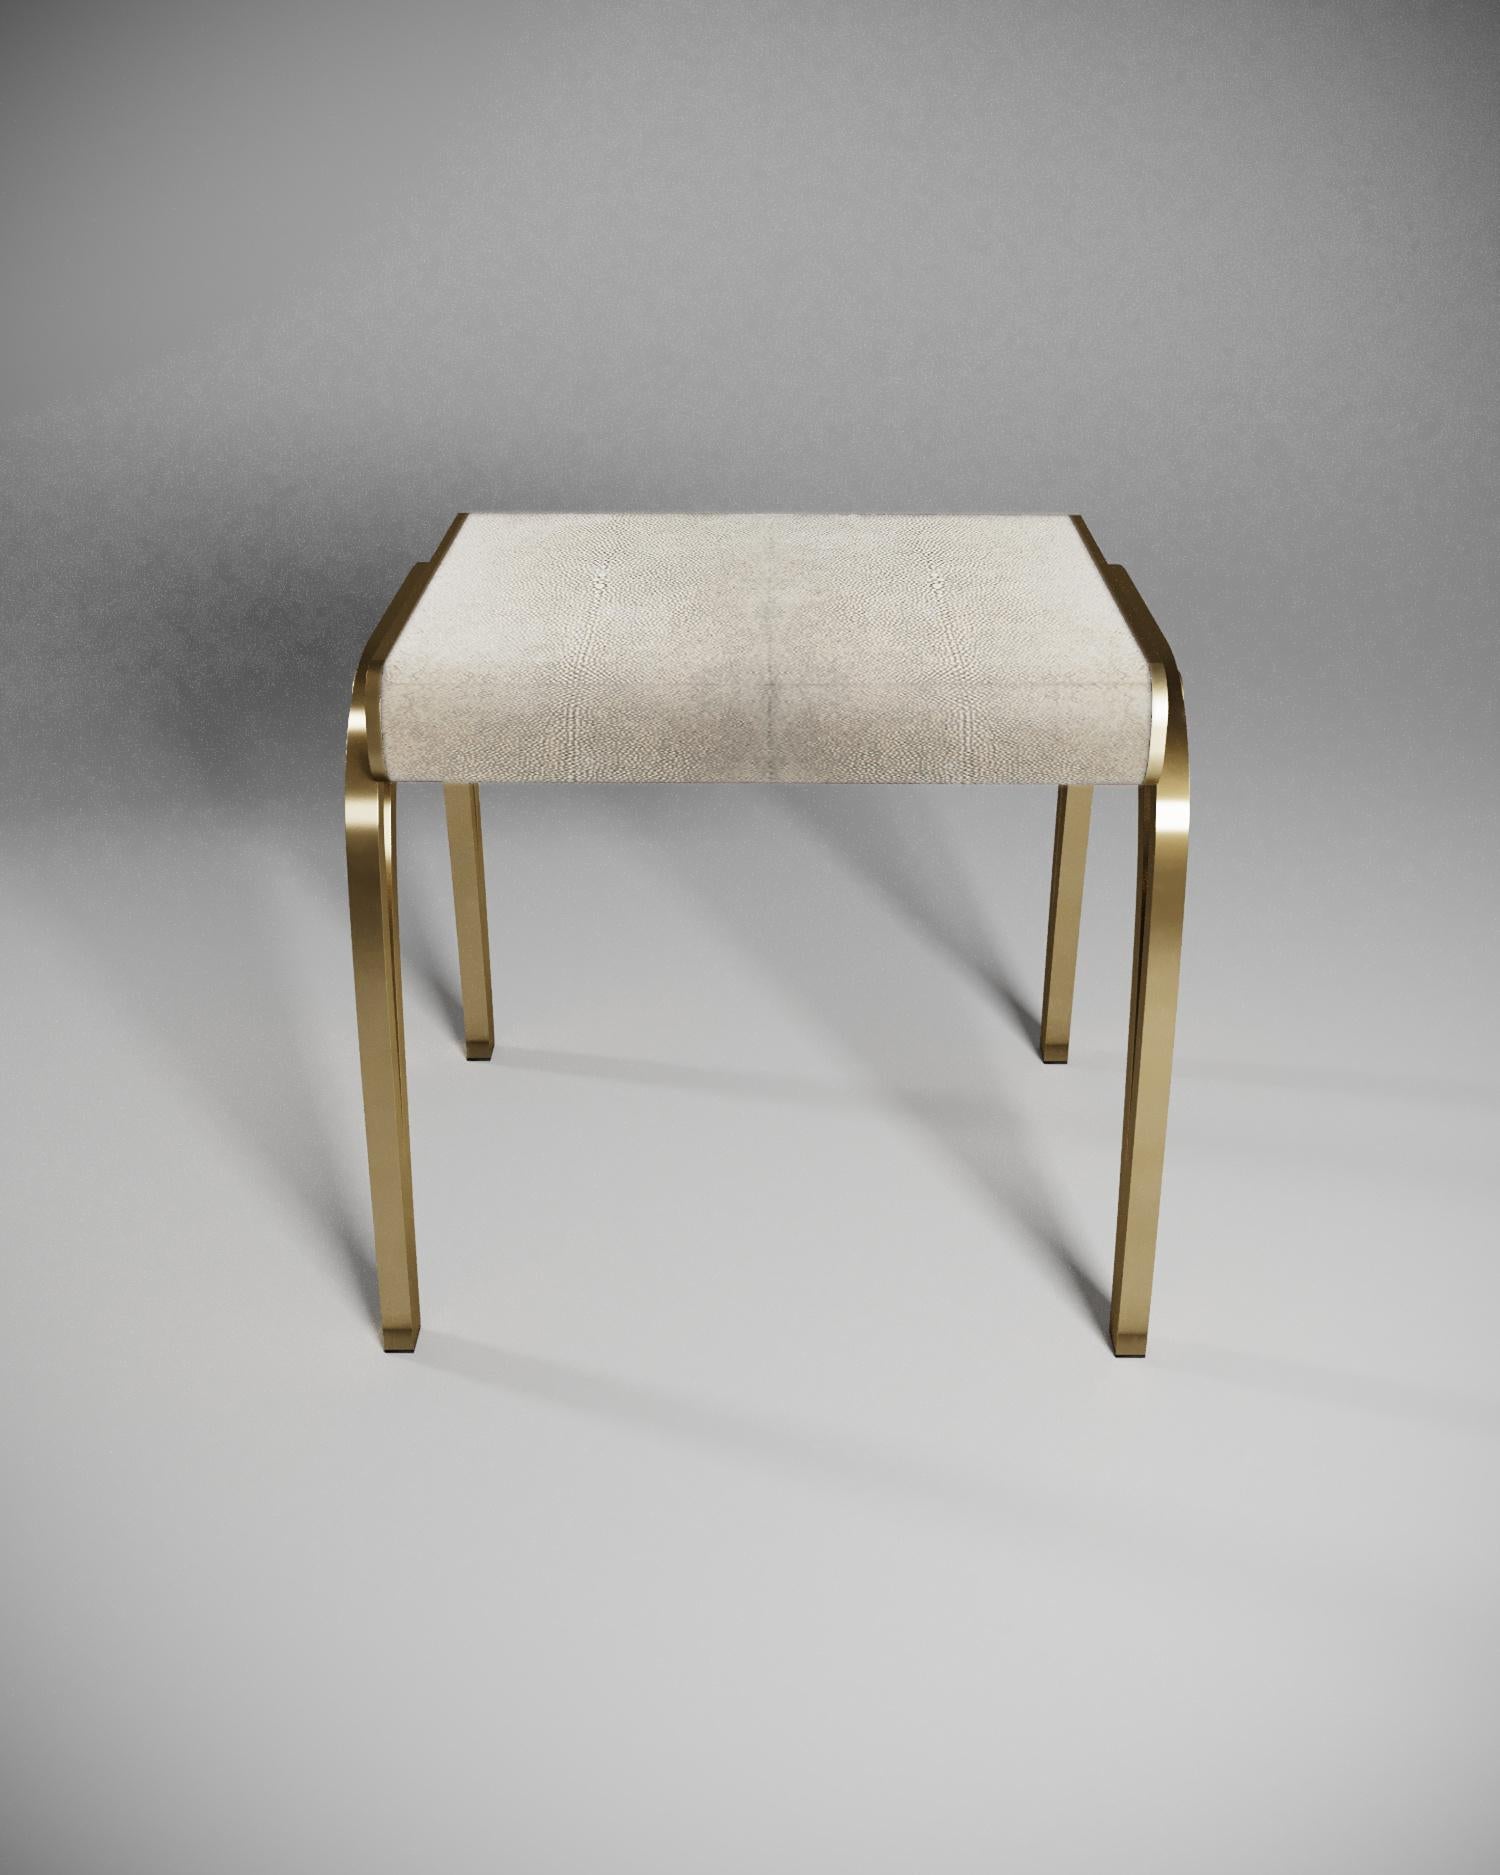 The limited edition Victoria stool by R & Y Augousti is a sophisticated piece that provides comfort, whilst retaining its elegant and luxurious aesthetic. The seat is inlaid cream shagreen, with a bronze-patina brass frame. Available in other finish